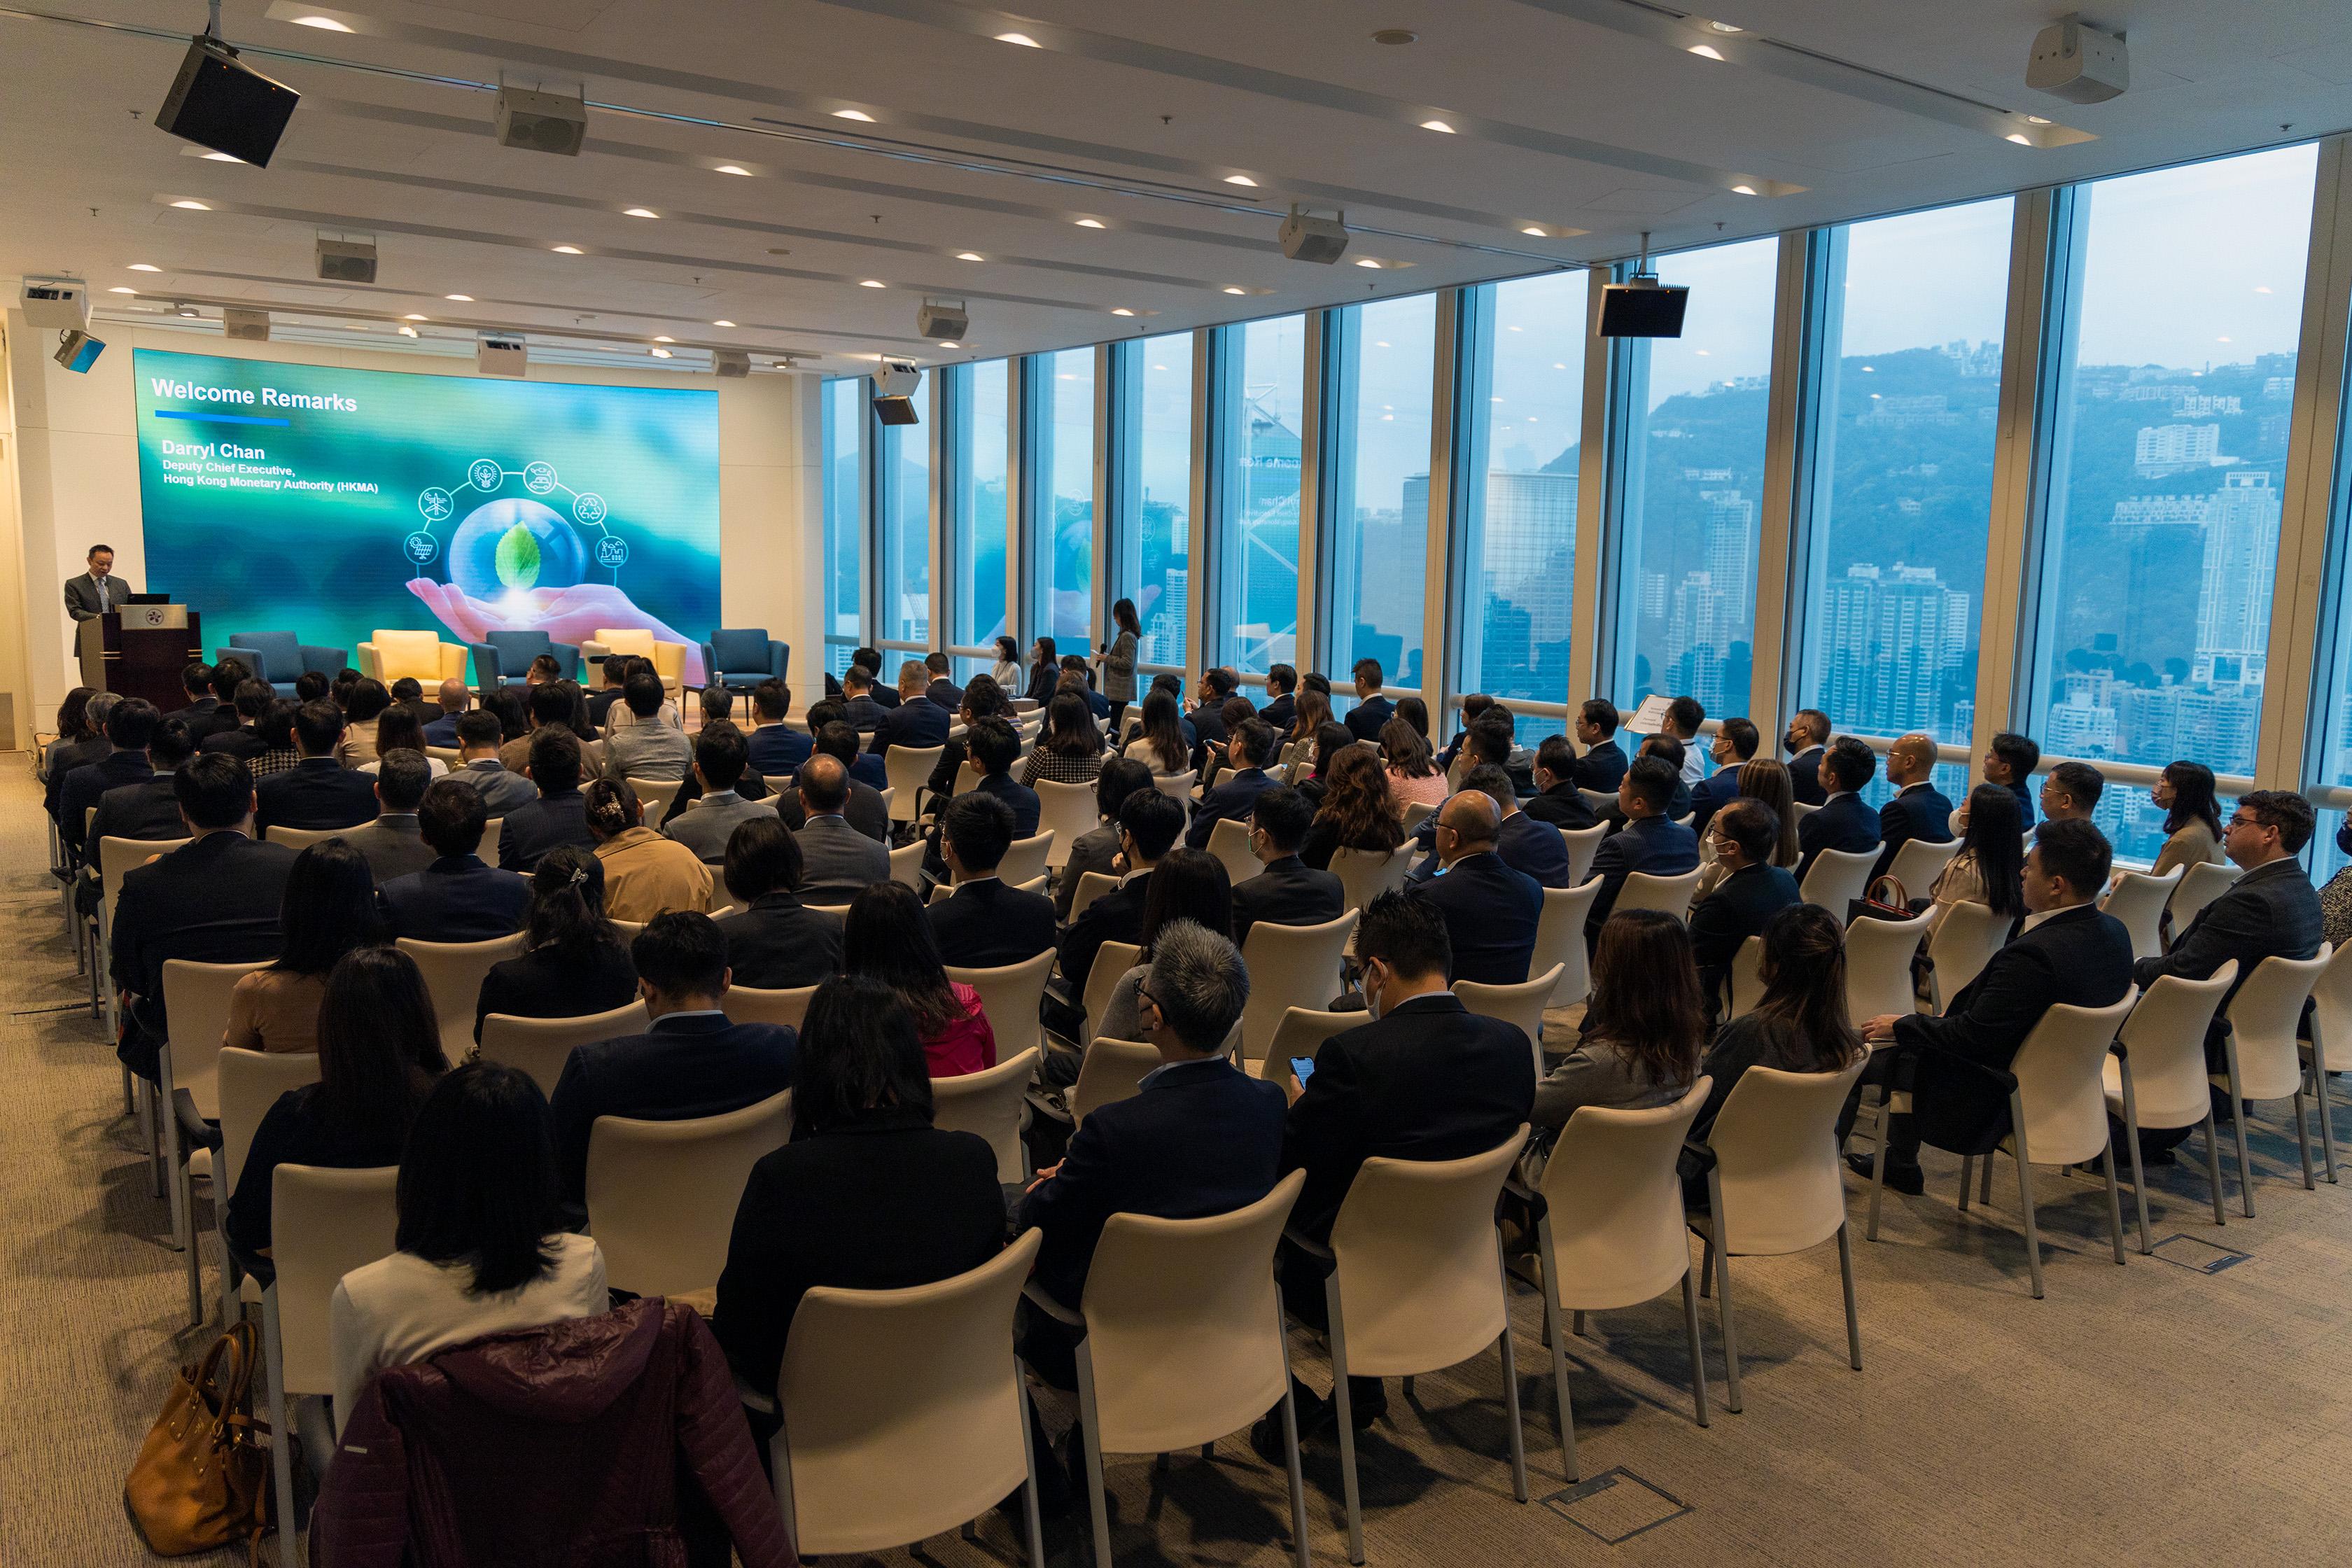 The Green and Sustainable Finance Cross-Agency Steering Group and CDP co-organised a joint seminar on sustainability reporting today (March 13). Around 500 on-site and online participants attended the seminar.